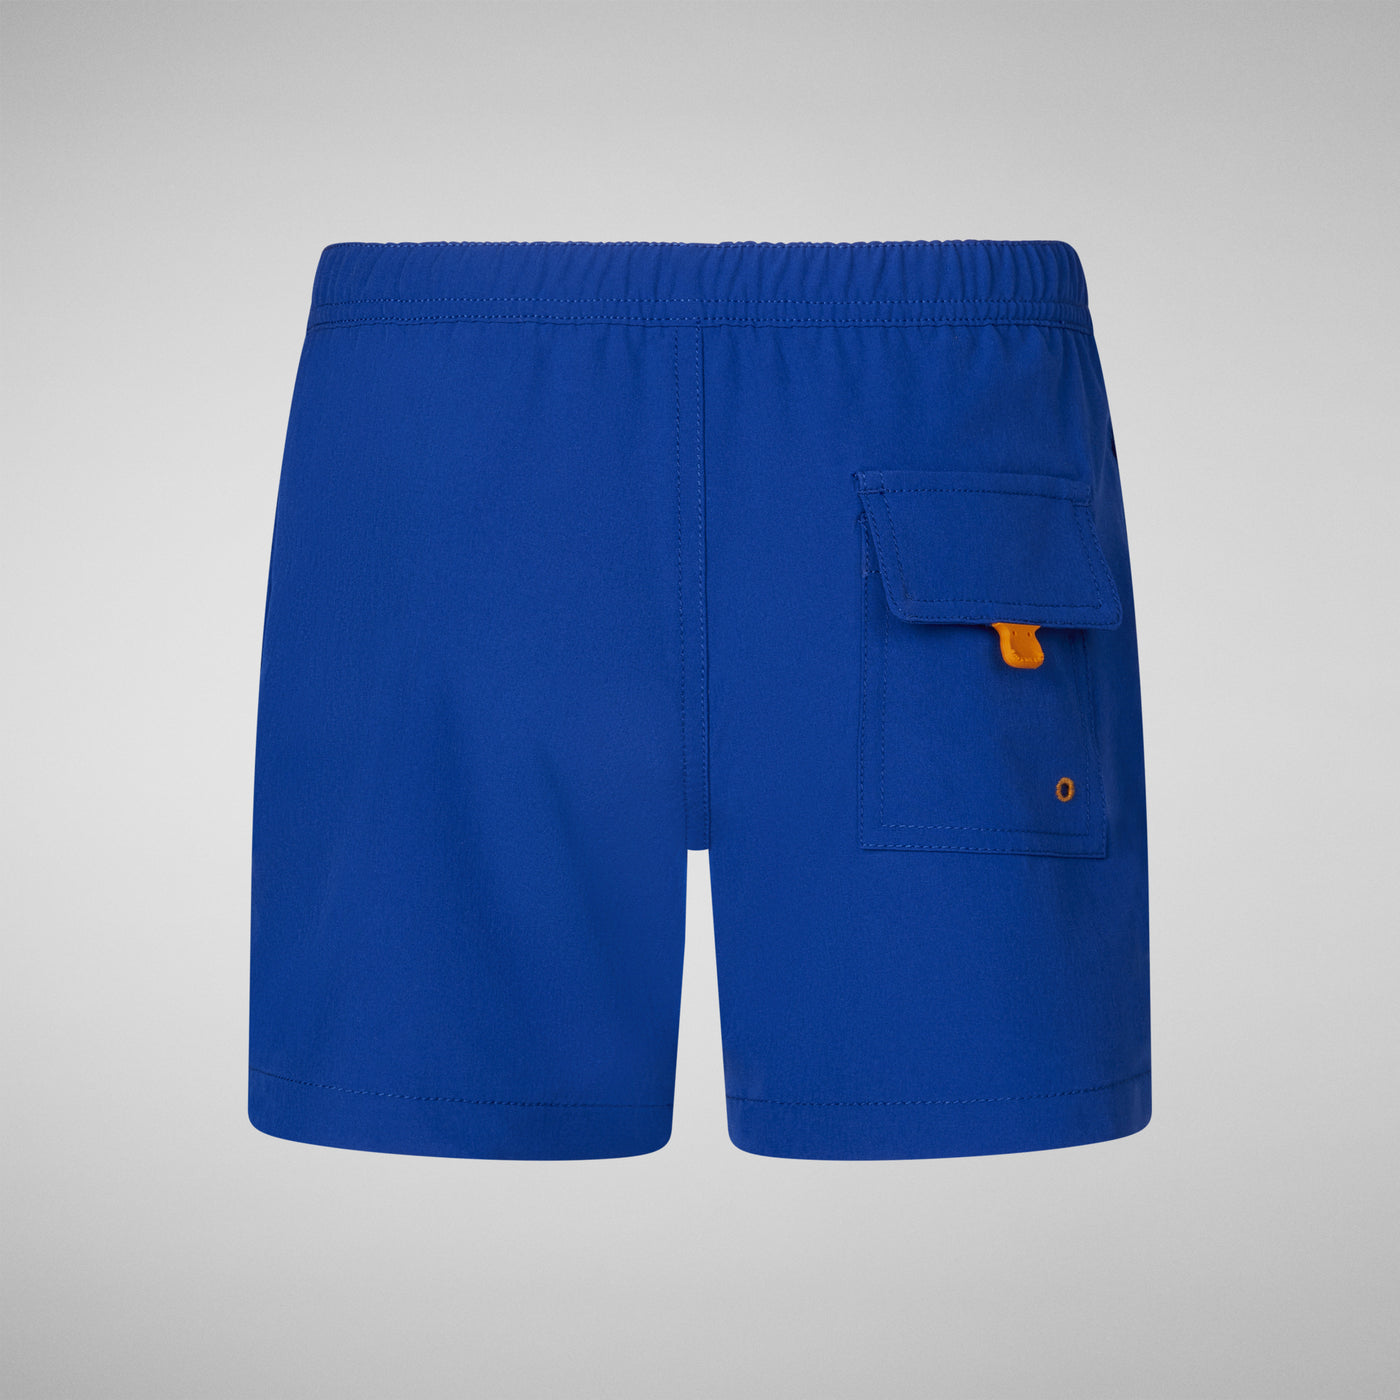 Product Back View of Boys' Adao Swim Trunks in Cyber Blue